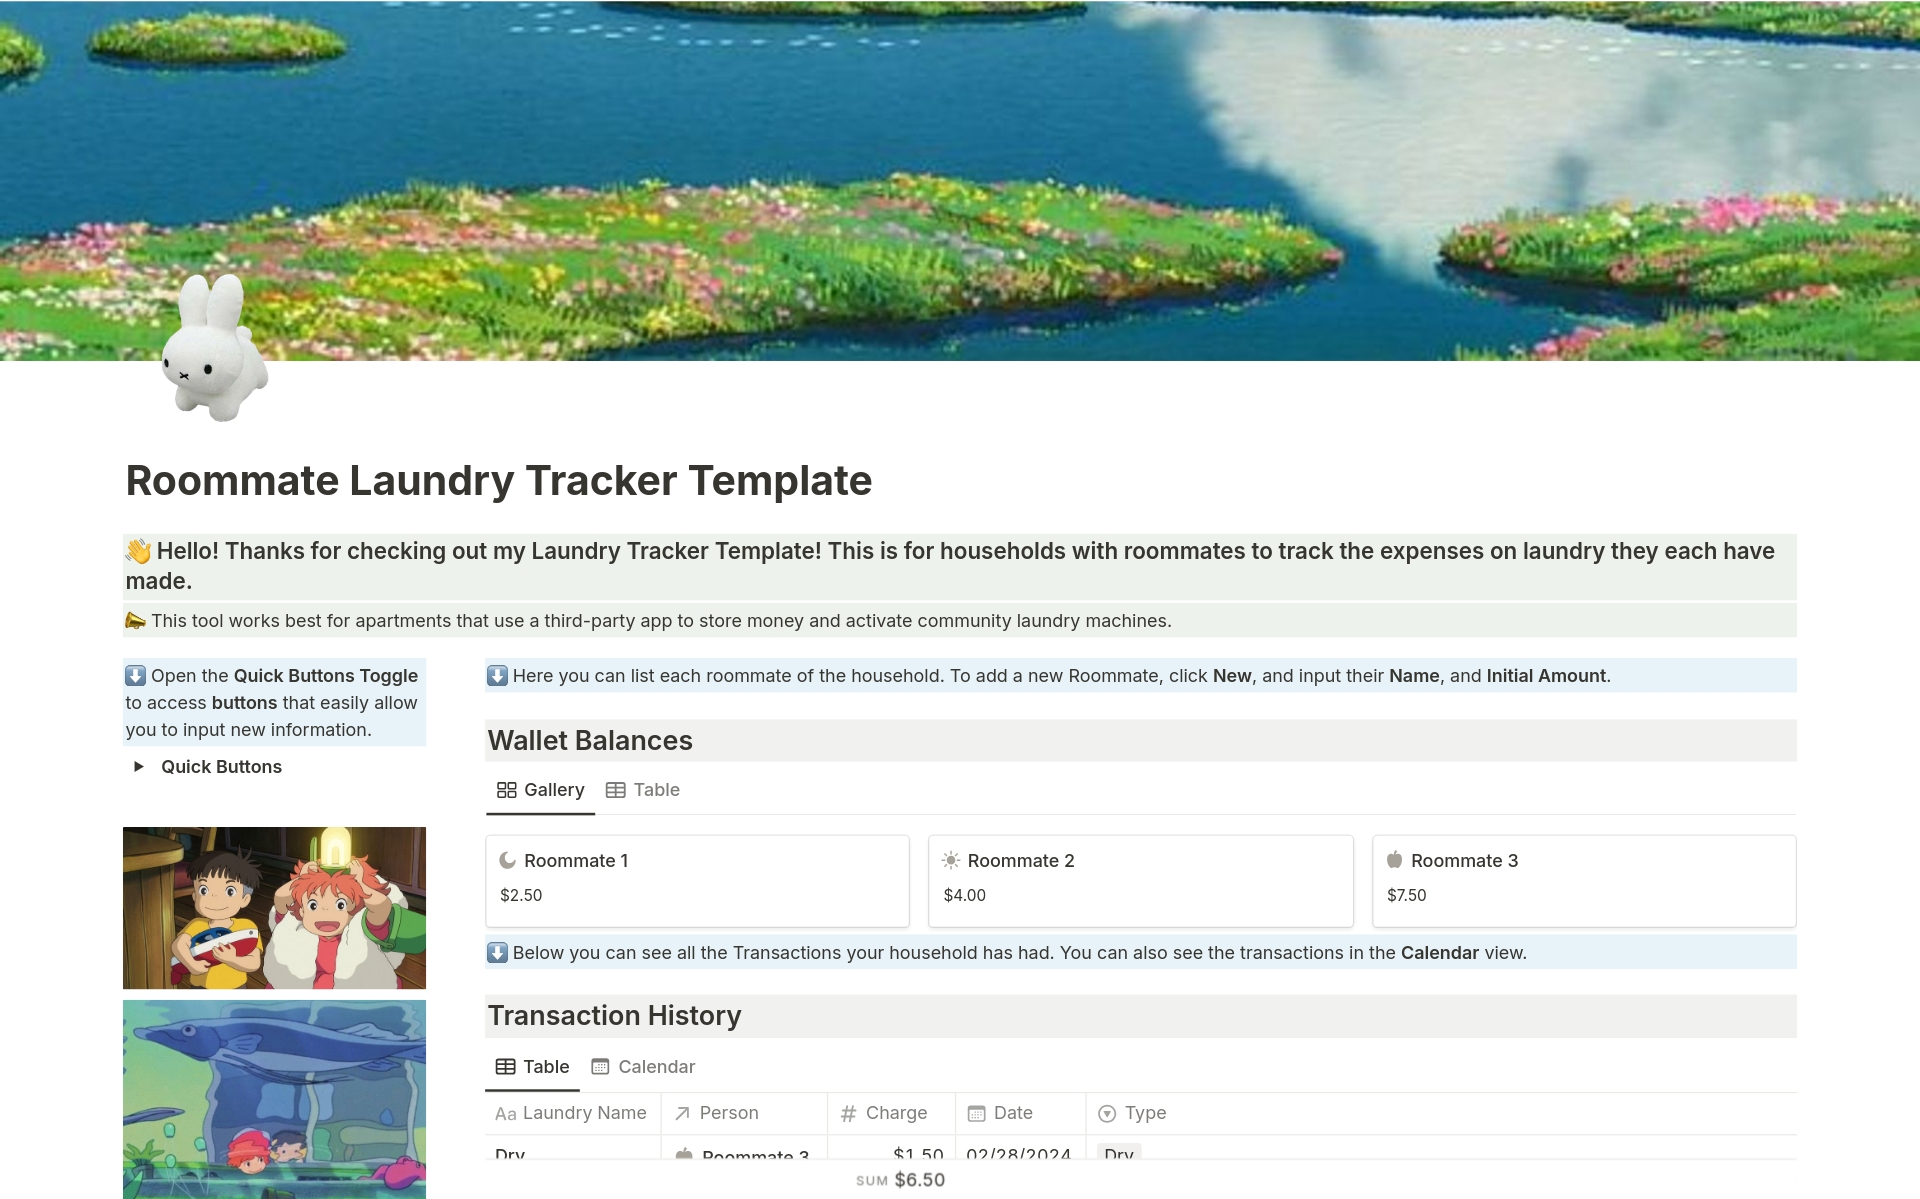 Hello! Thanks for checking out my Laundry Tracker Template! This is for households with roommates to track the expenses on laundry they each have made.